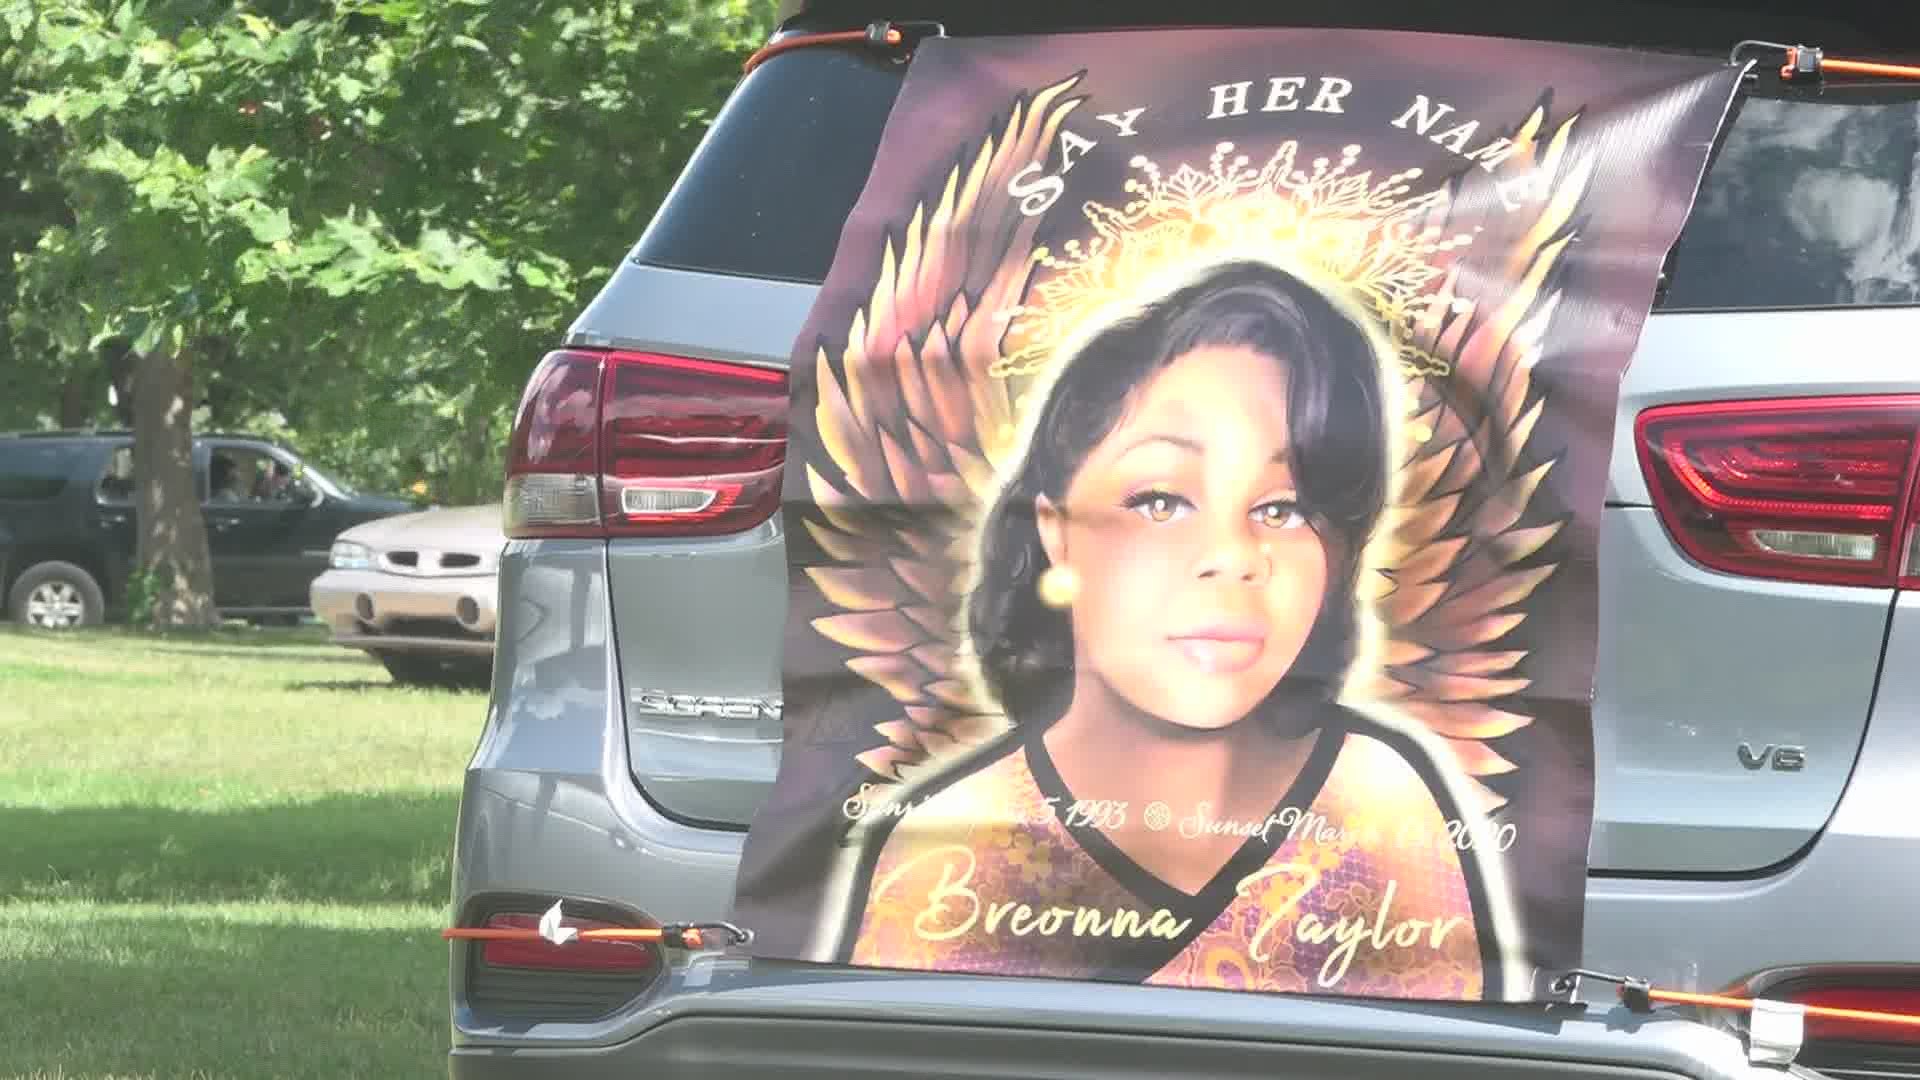 The West Michigan community is still seeking justice for Breonna Taylor, a Grand Rapids native.